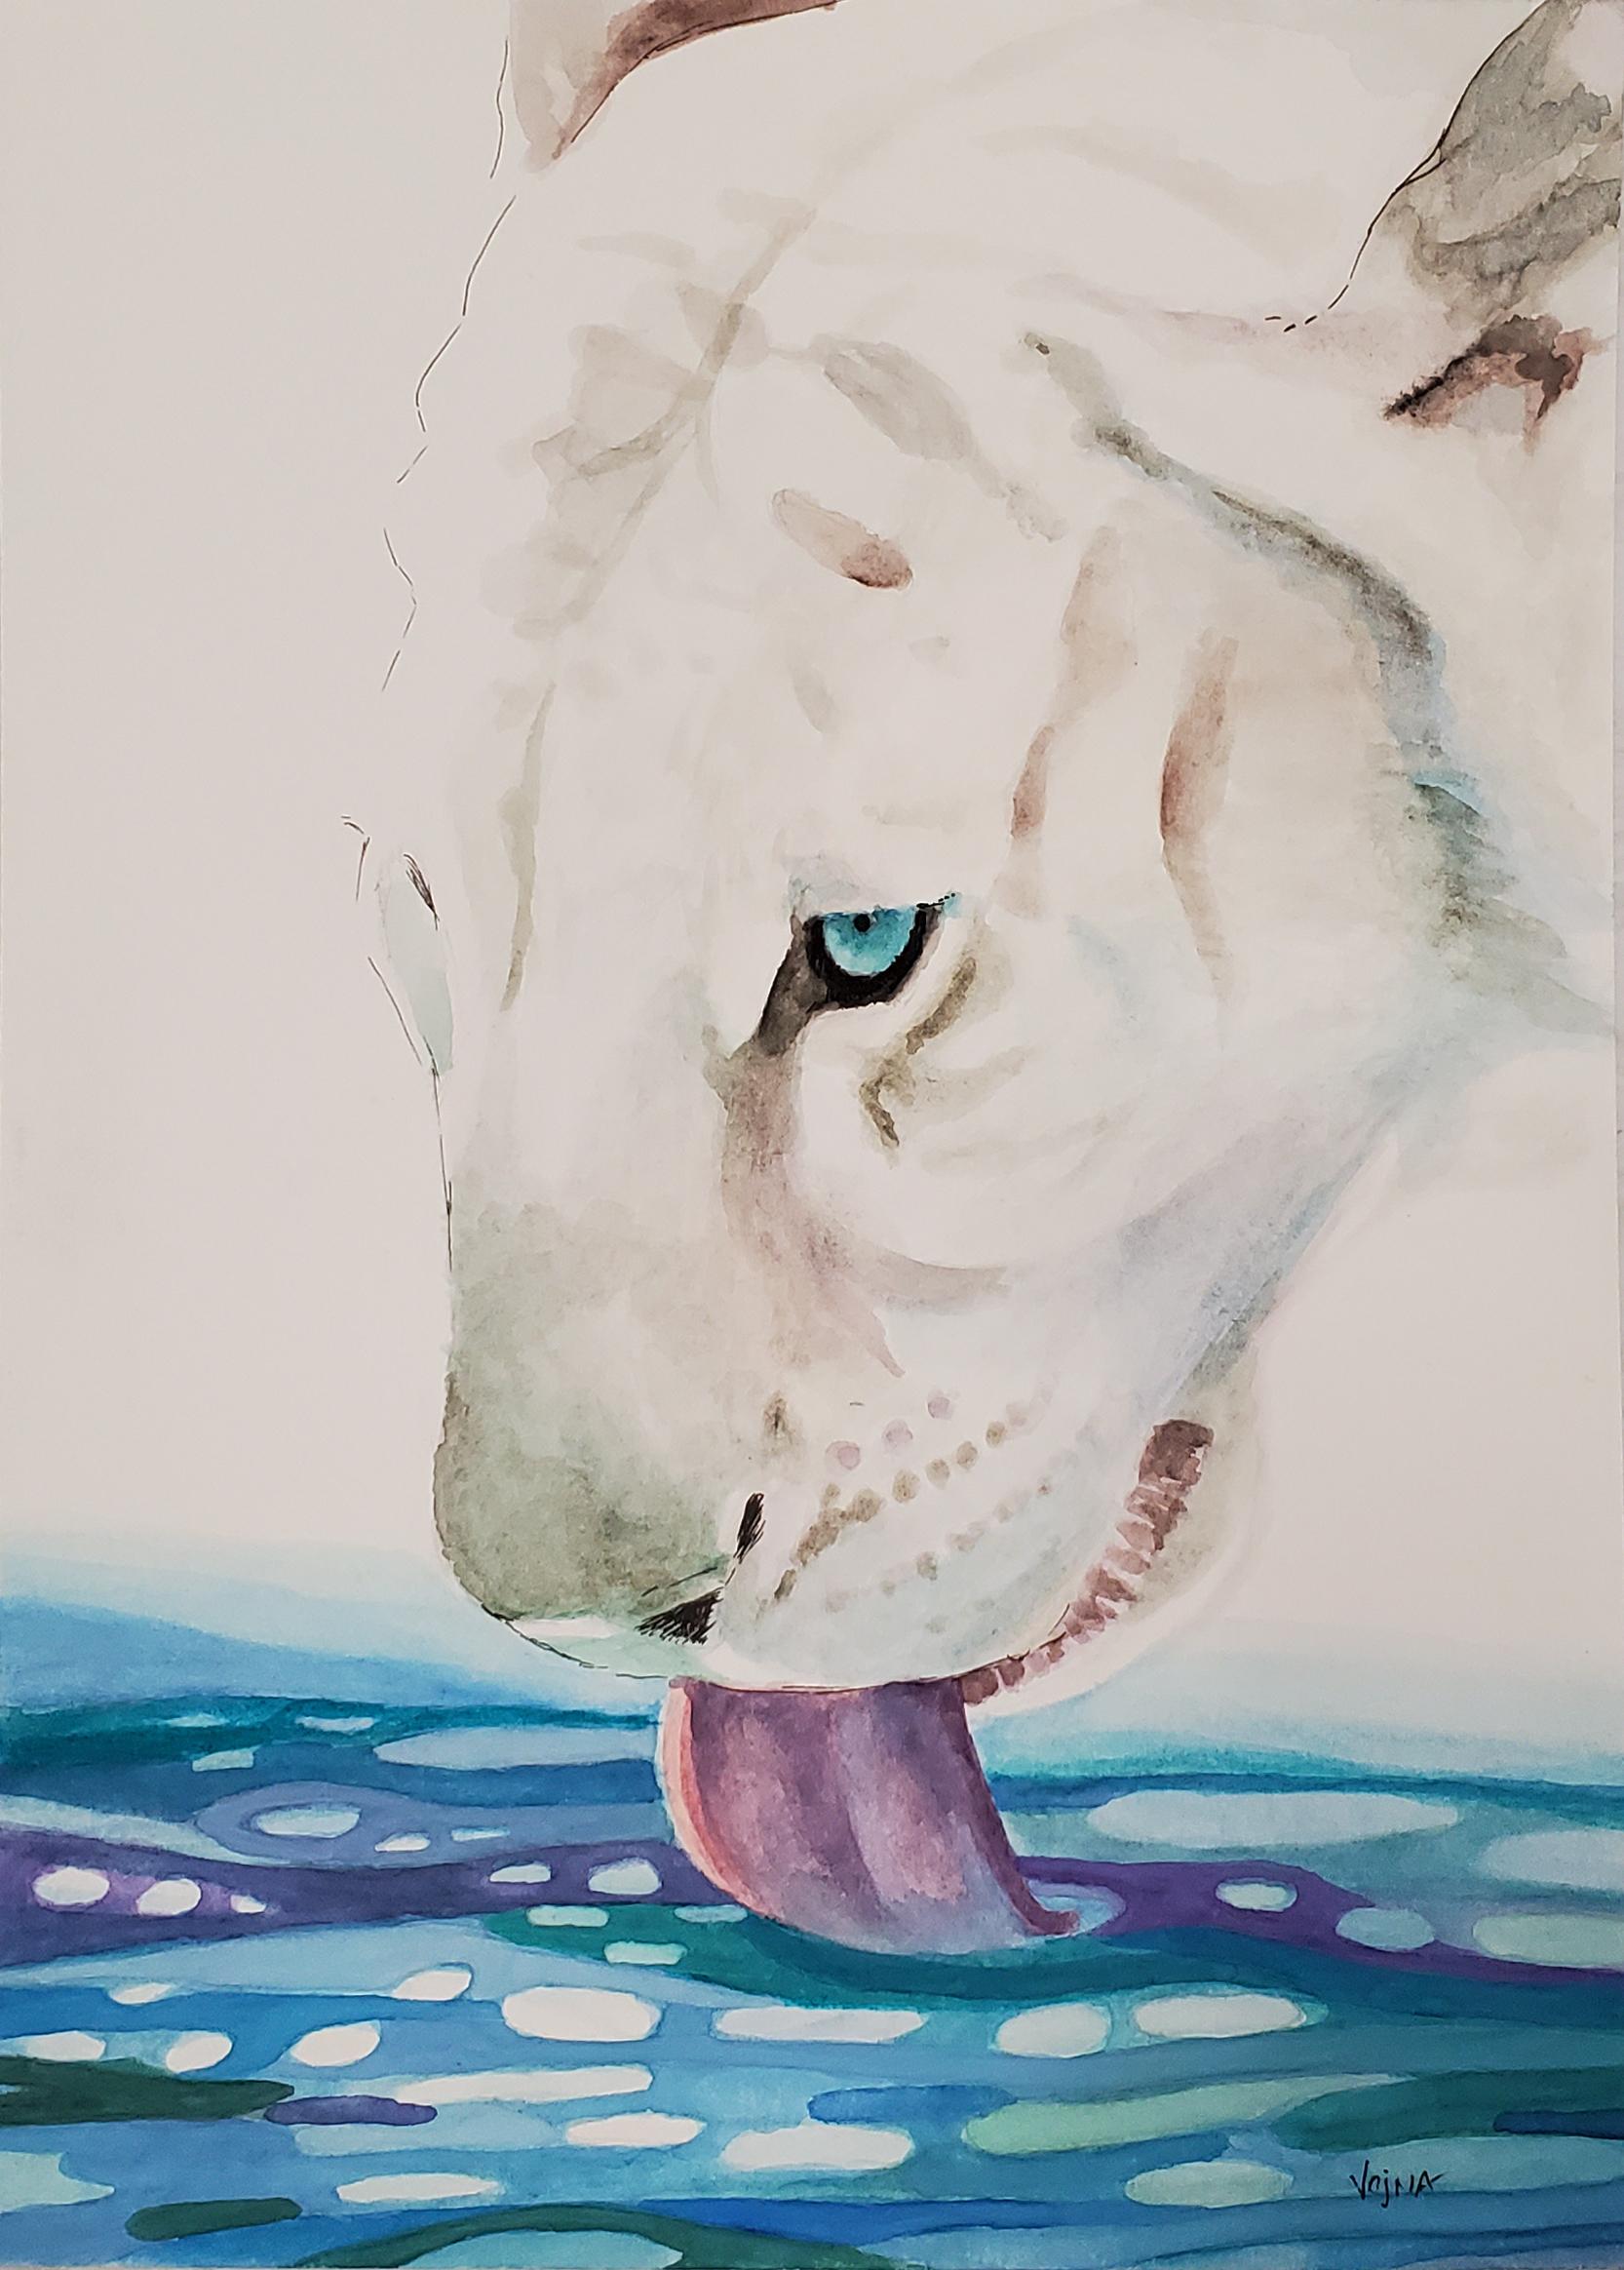 'White Tiger,' by Vojna Bastovanovic Casteel, is a framed Watercolor on Paper painting from 2021. The work on paper features an image of a white tiger drinking from a pool of water. The tiger is rendered in cool tones of mostly grays and blues. The